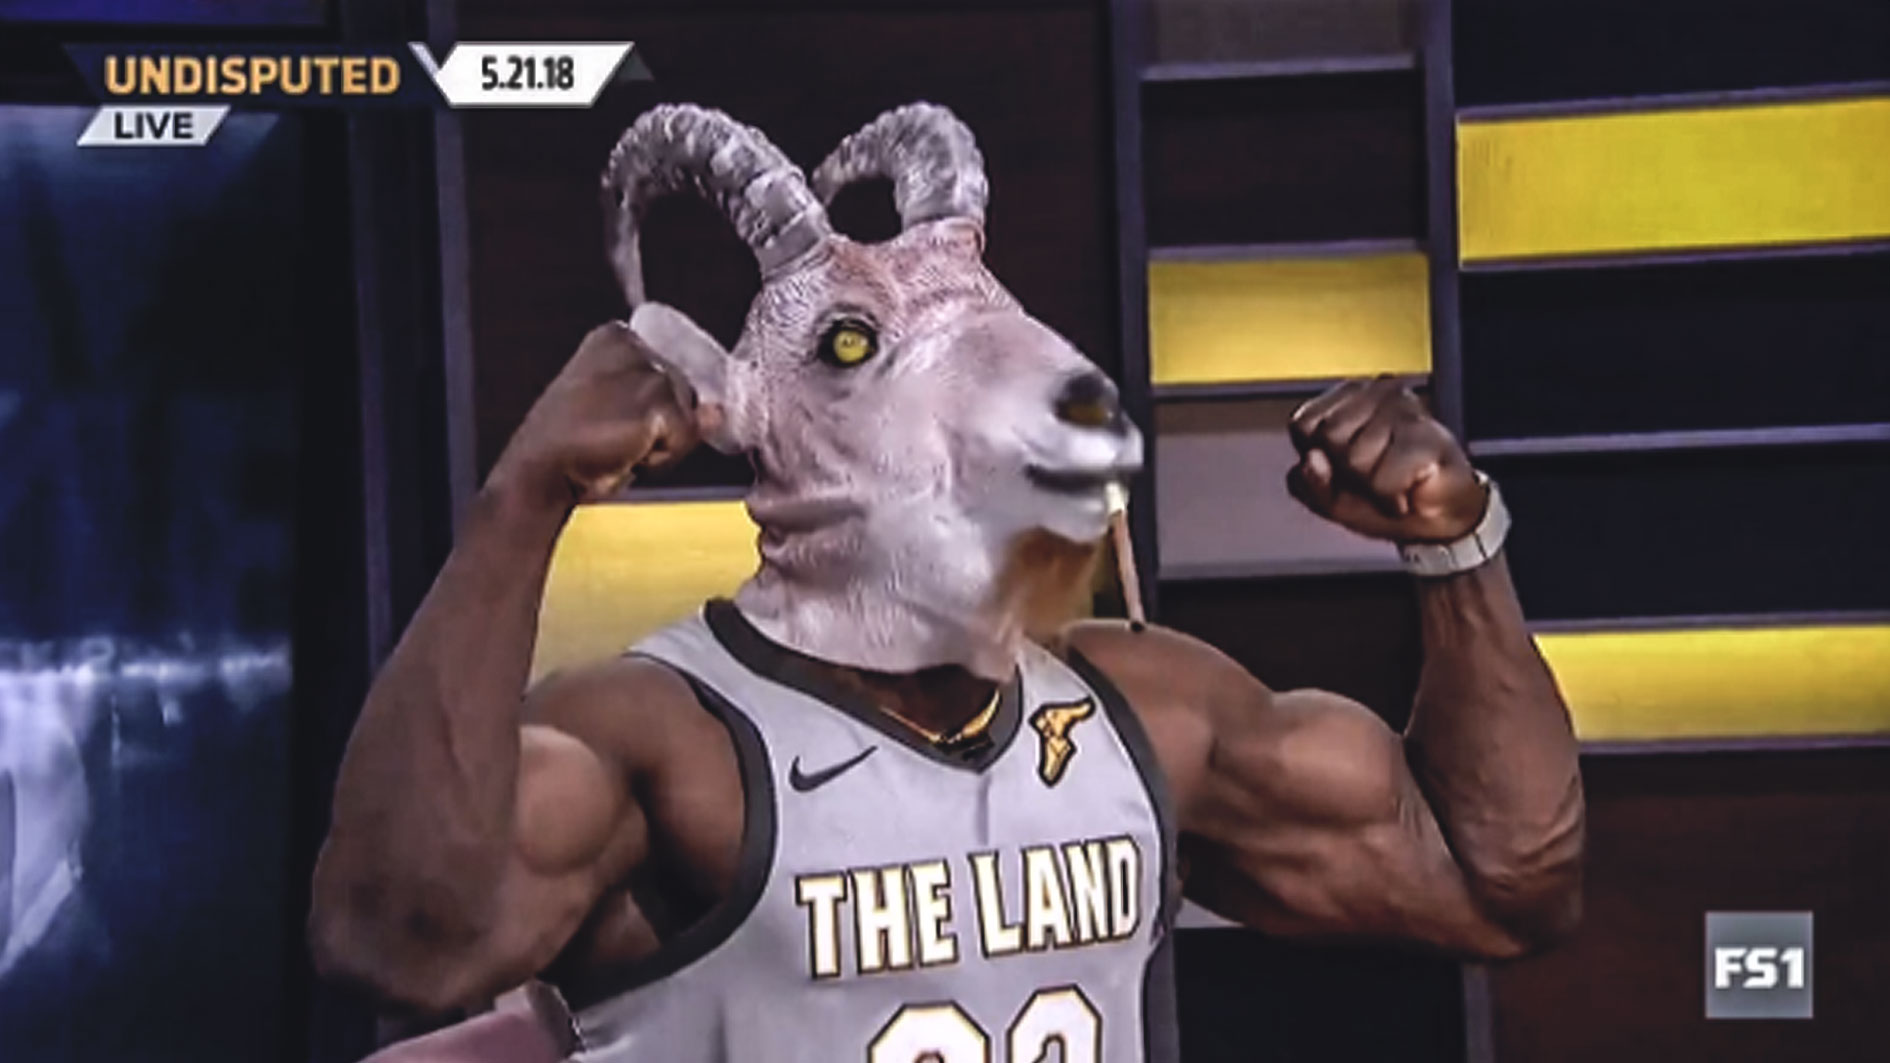 Shannon Sharpe dressed as GOAT James, with a LeBron jersey and a